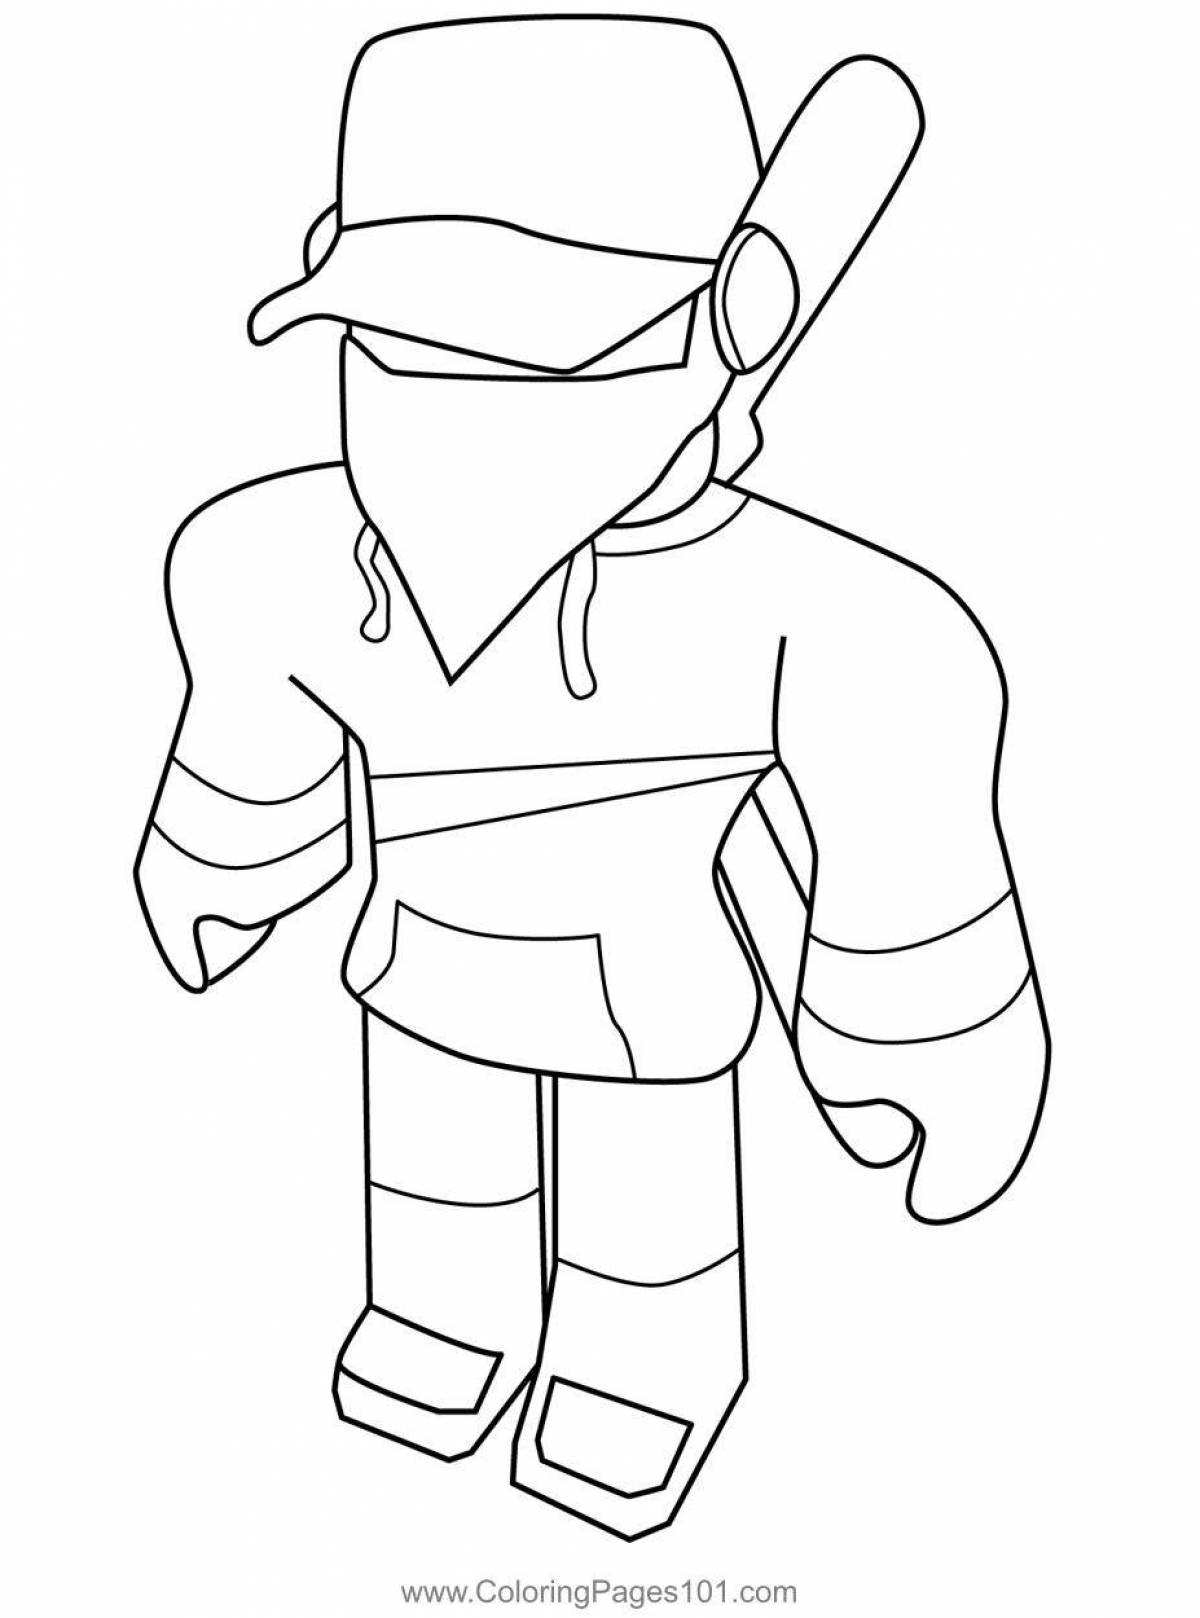 Artistic roblox face coloring page